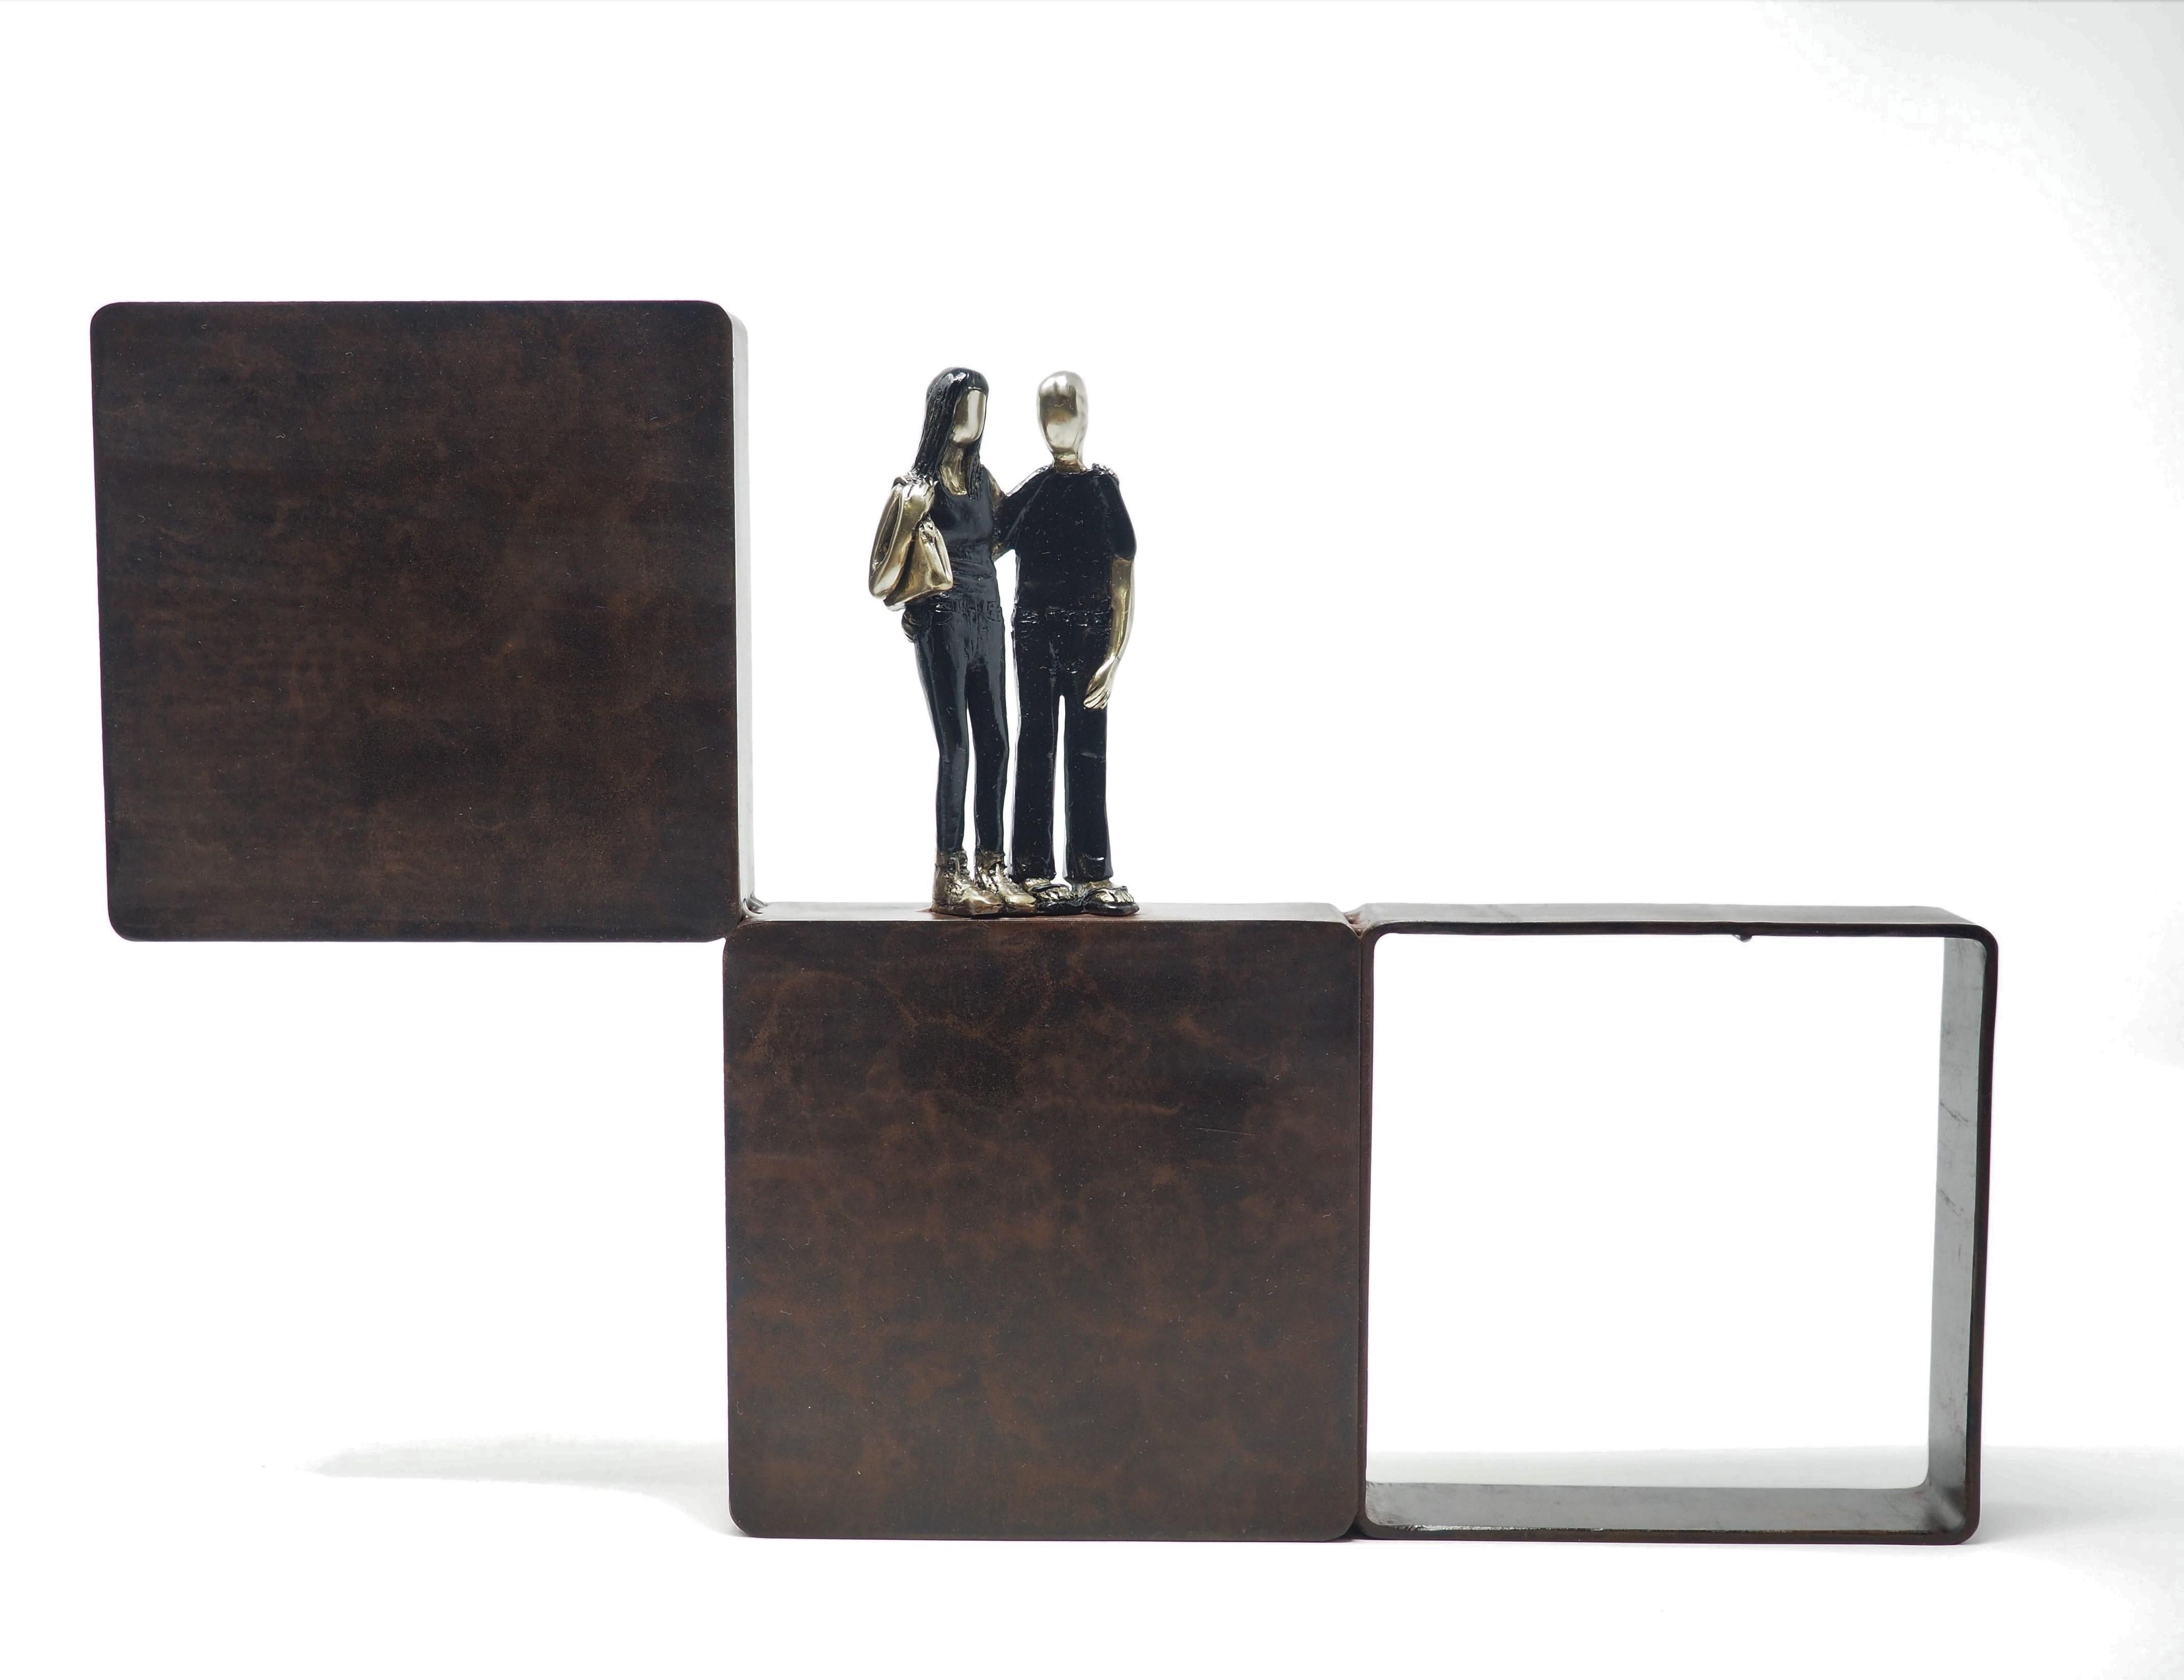 Weekend Getaway is a wall sculpture that captures snapshot of loving couples.

Edition Size: 18. Sculpture for wall easily hung with 3 screws/nails.

BIOGRAPHY OF MIREIA SERRA
Mireia Serra was born in 1973, she graduated from the Llotja School of